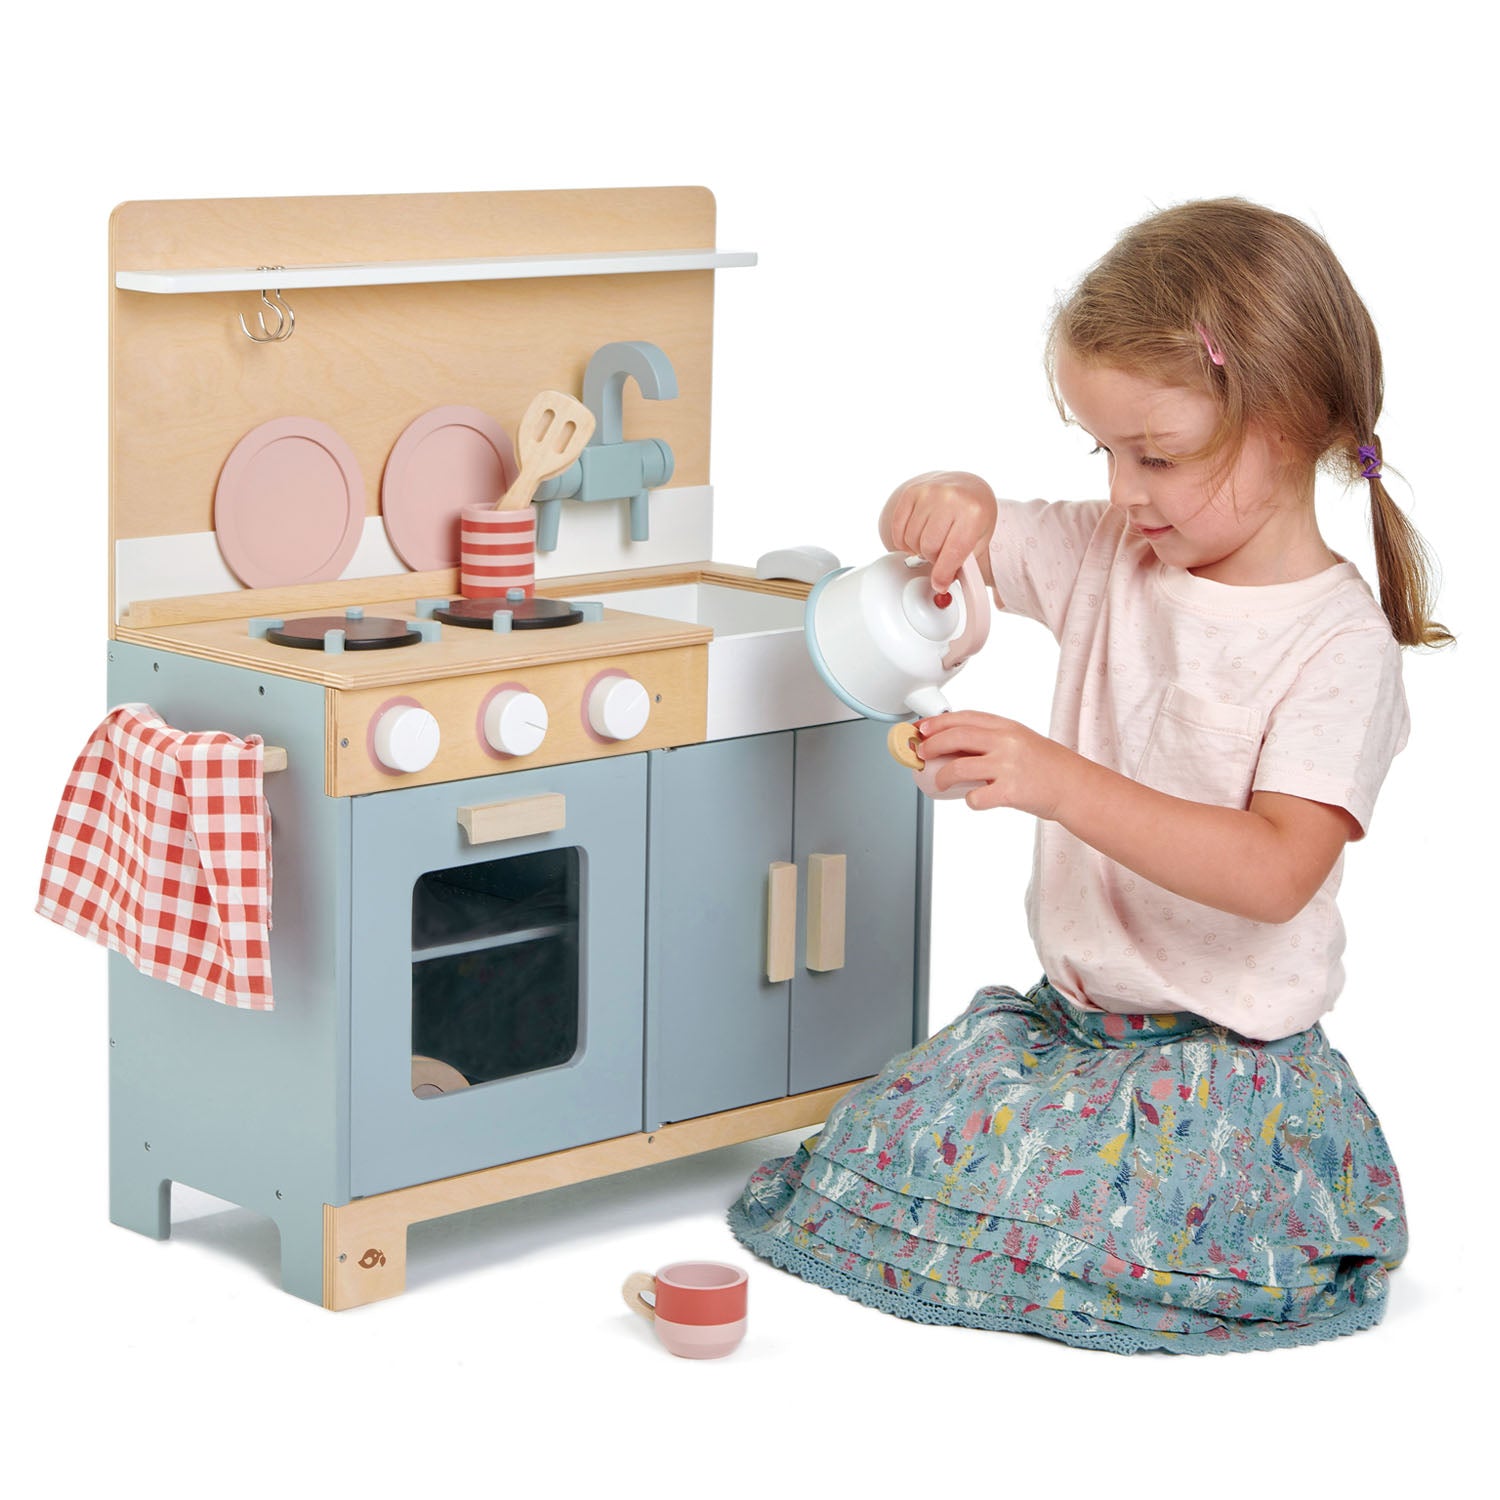 Toysters 6-piece Cooking & Baking Mixer Set Wooden Play Kitchen